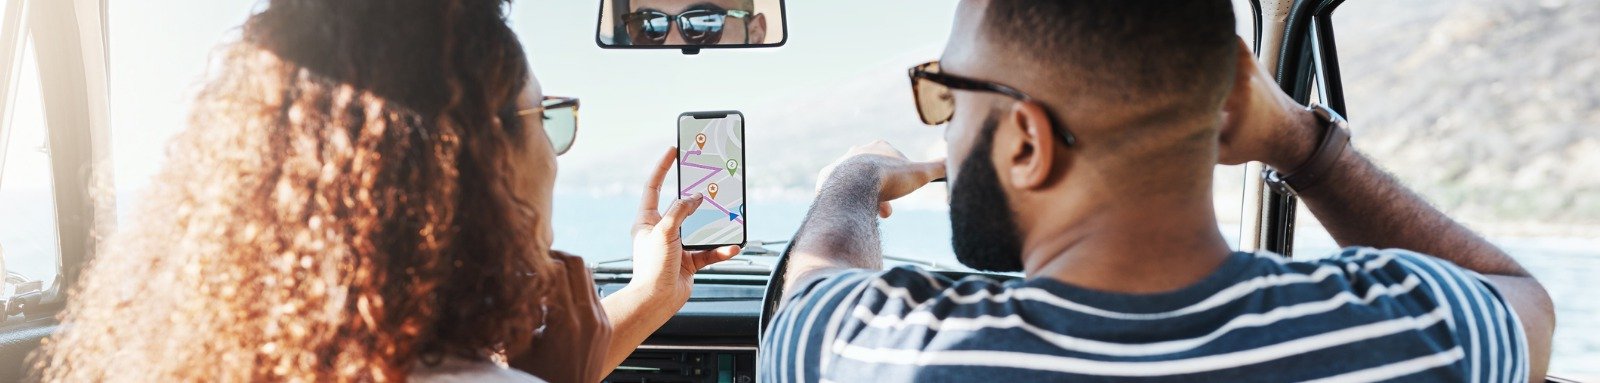 Couple looking at phone GPS in the car